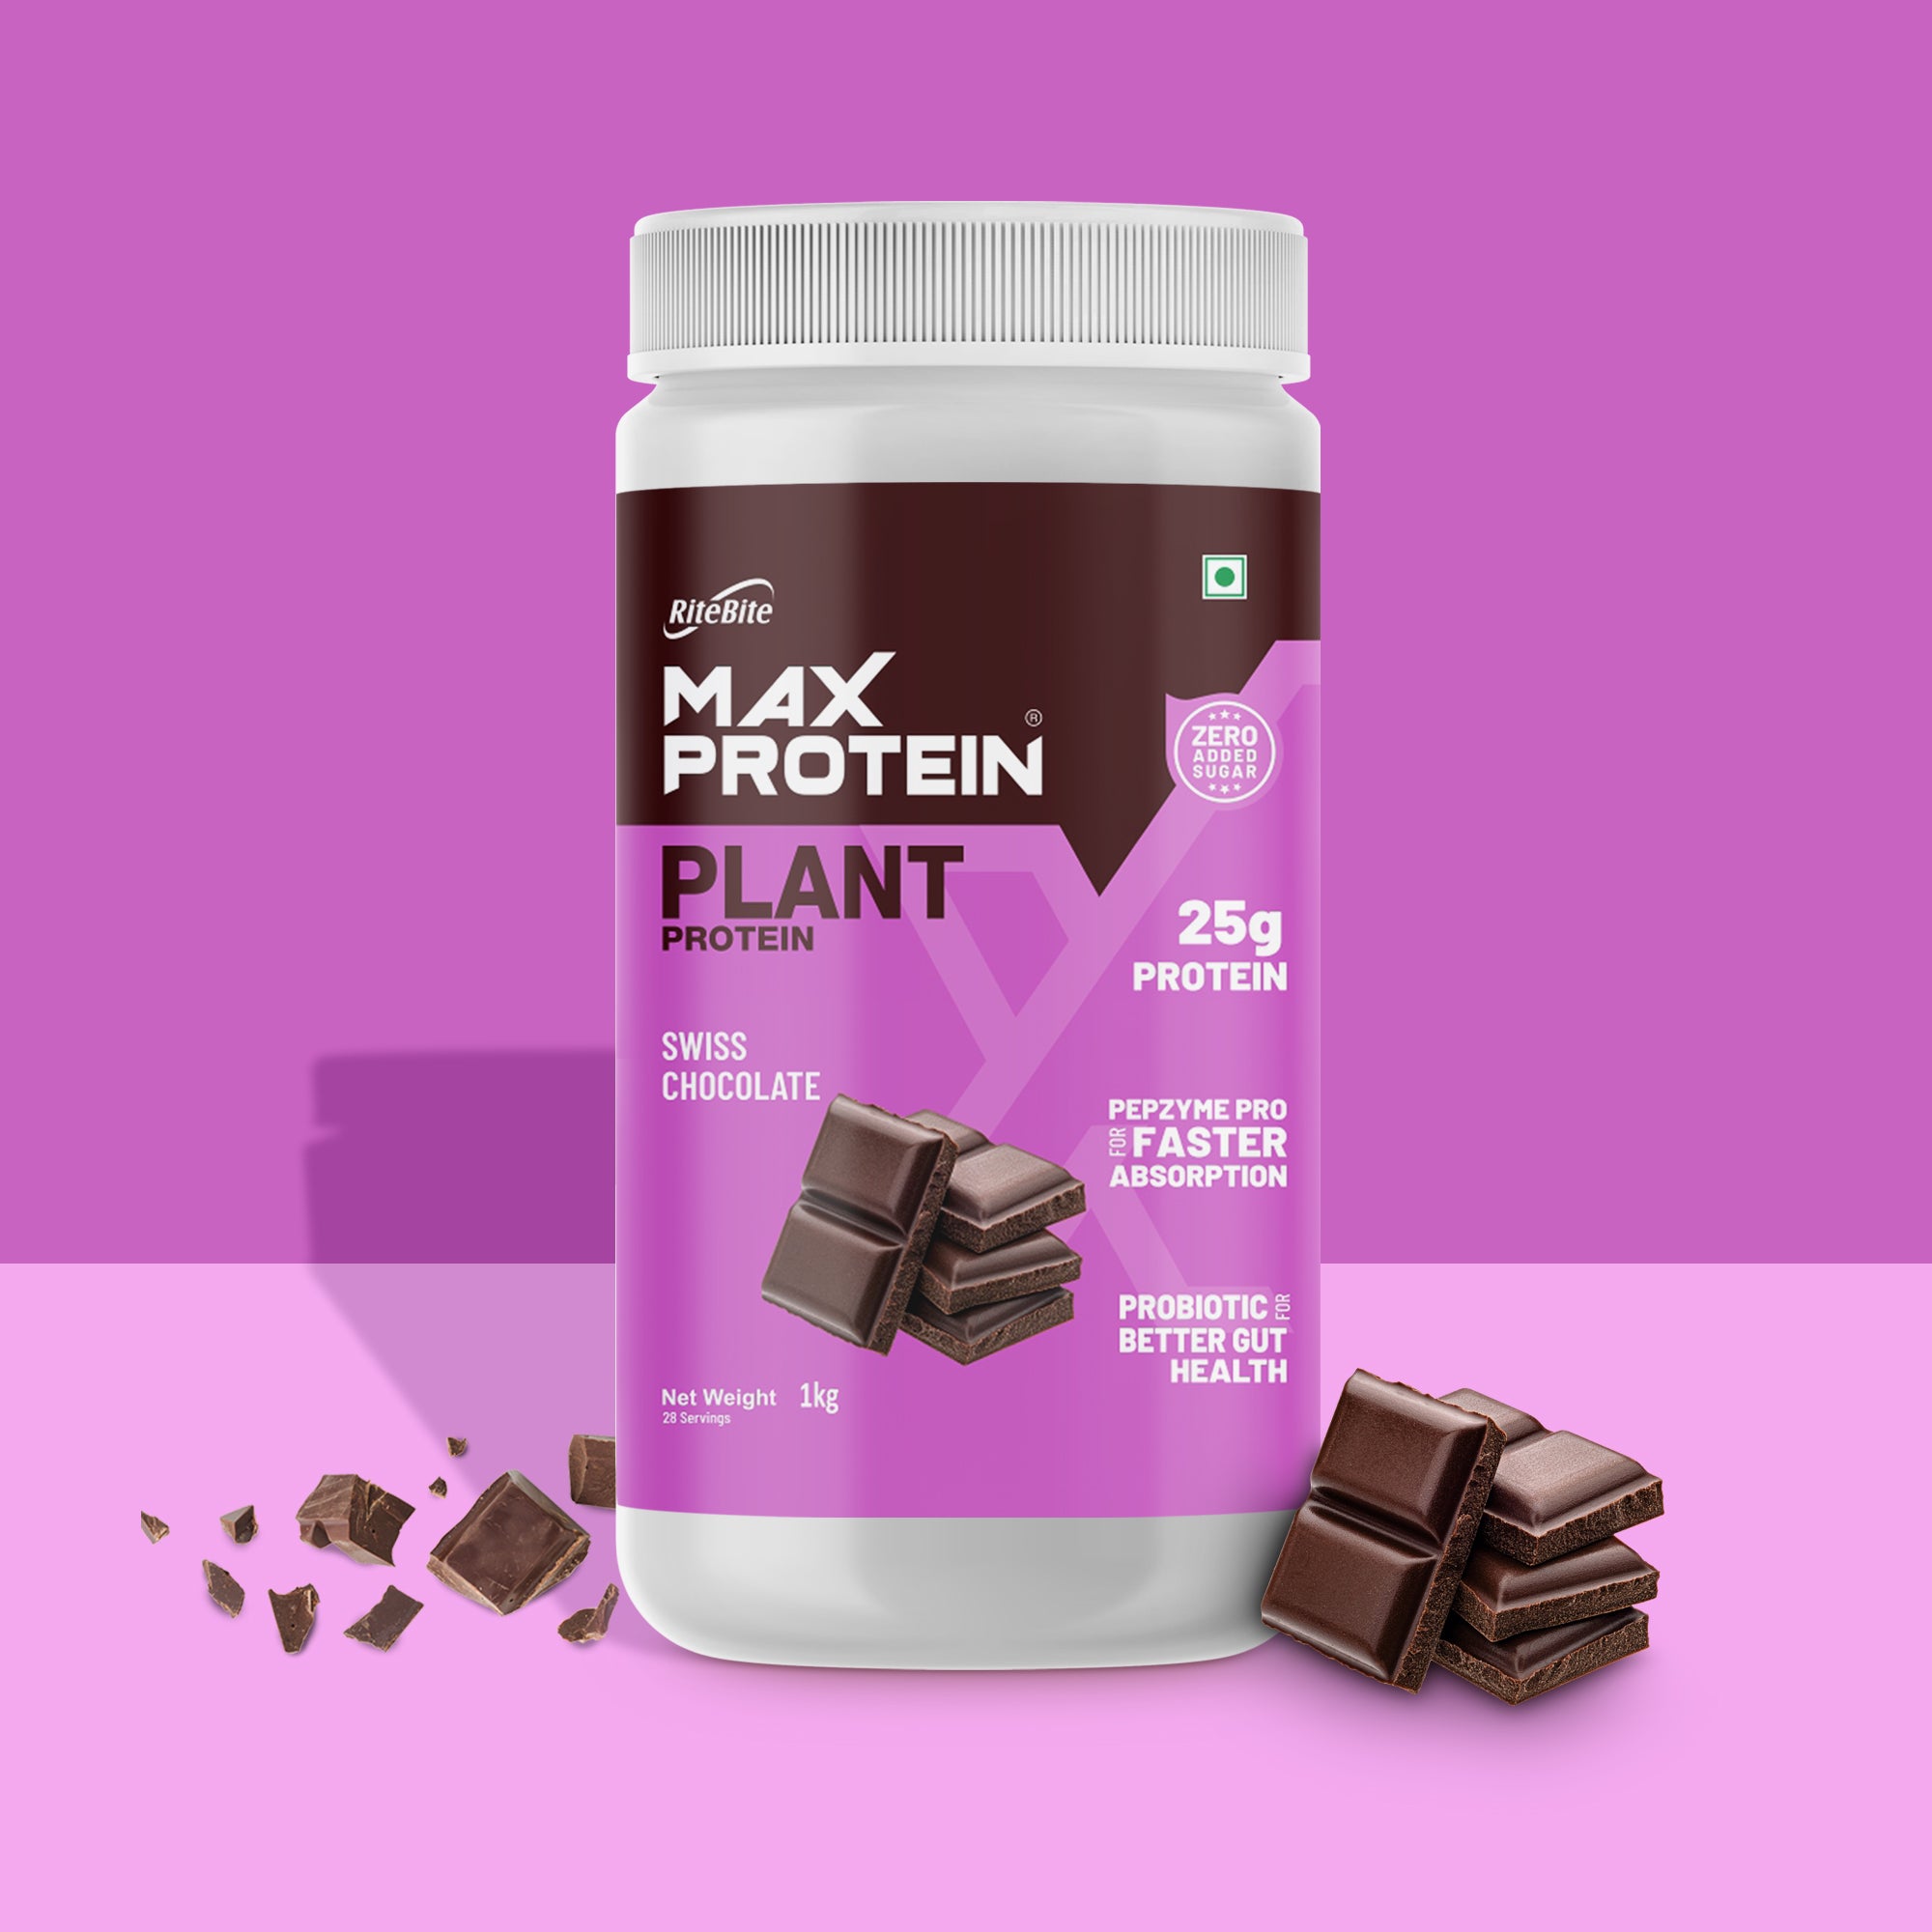 Max Protein Plant Protein - Swiss Chocolate